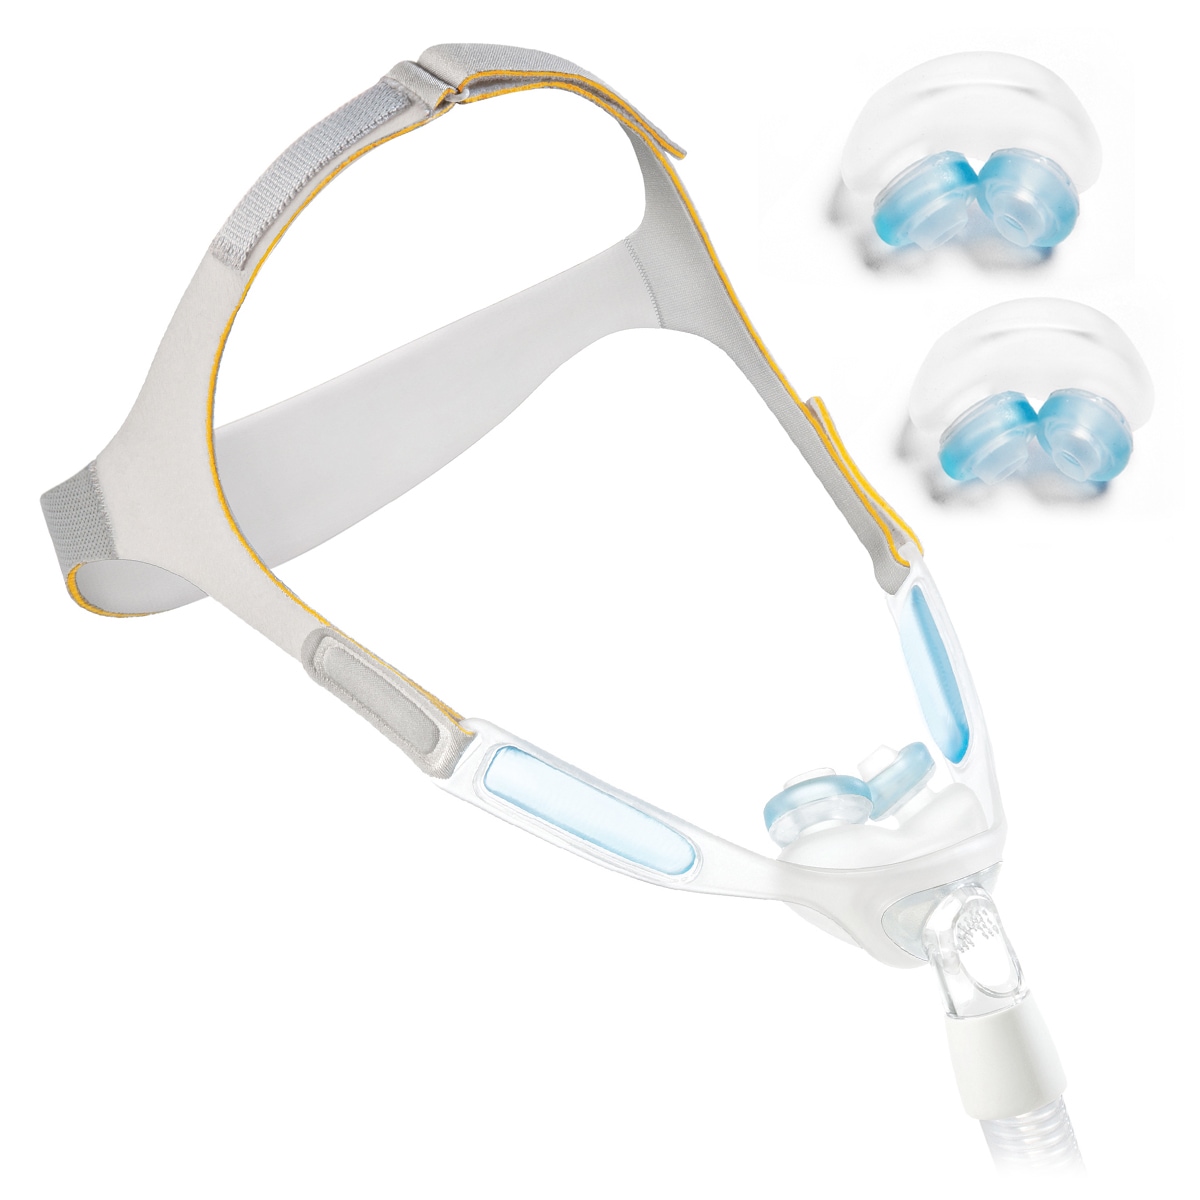 philips respironics nuance pro nasal pillow system